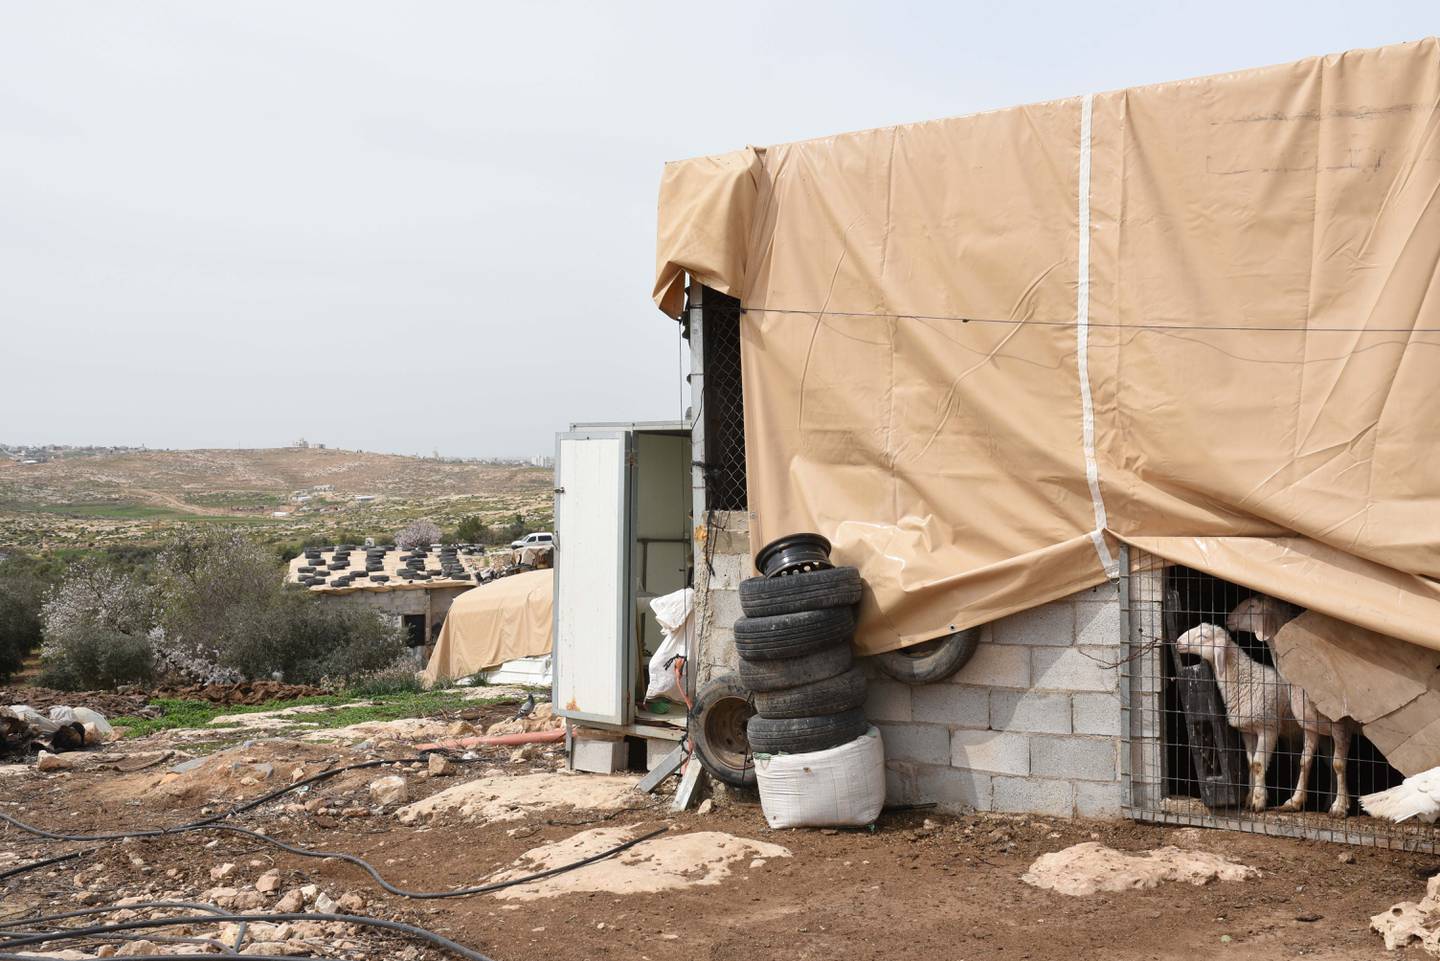 Livestock in the Palestinian village of Susiya is under threat because of a lack of water. Rosie Scammell / The National